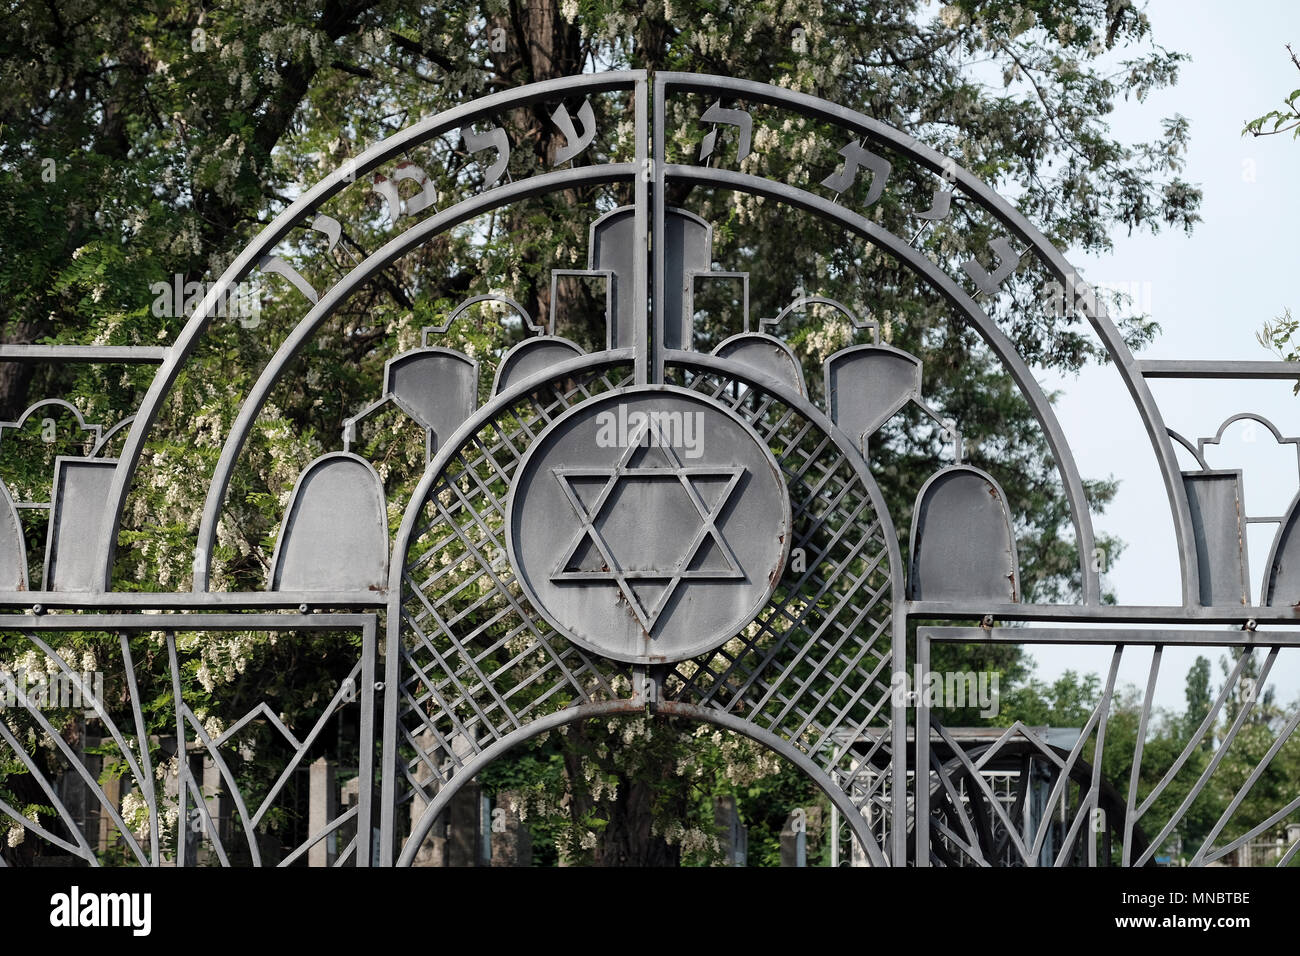 Gateway to the Jewish cemetery one of the largest Jewish Cemeteries in Europe in the city of Chisinau also known as Kishinev the capital of the Republic of Moldova Stock Photo